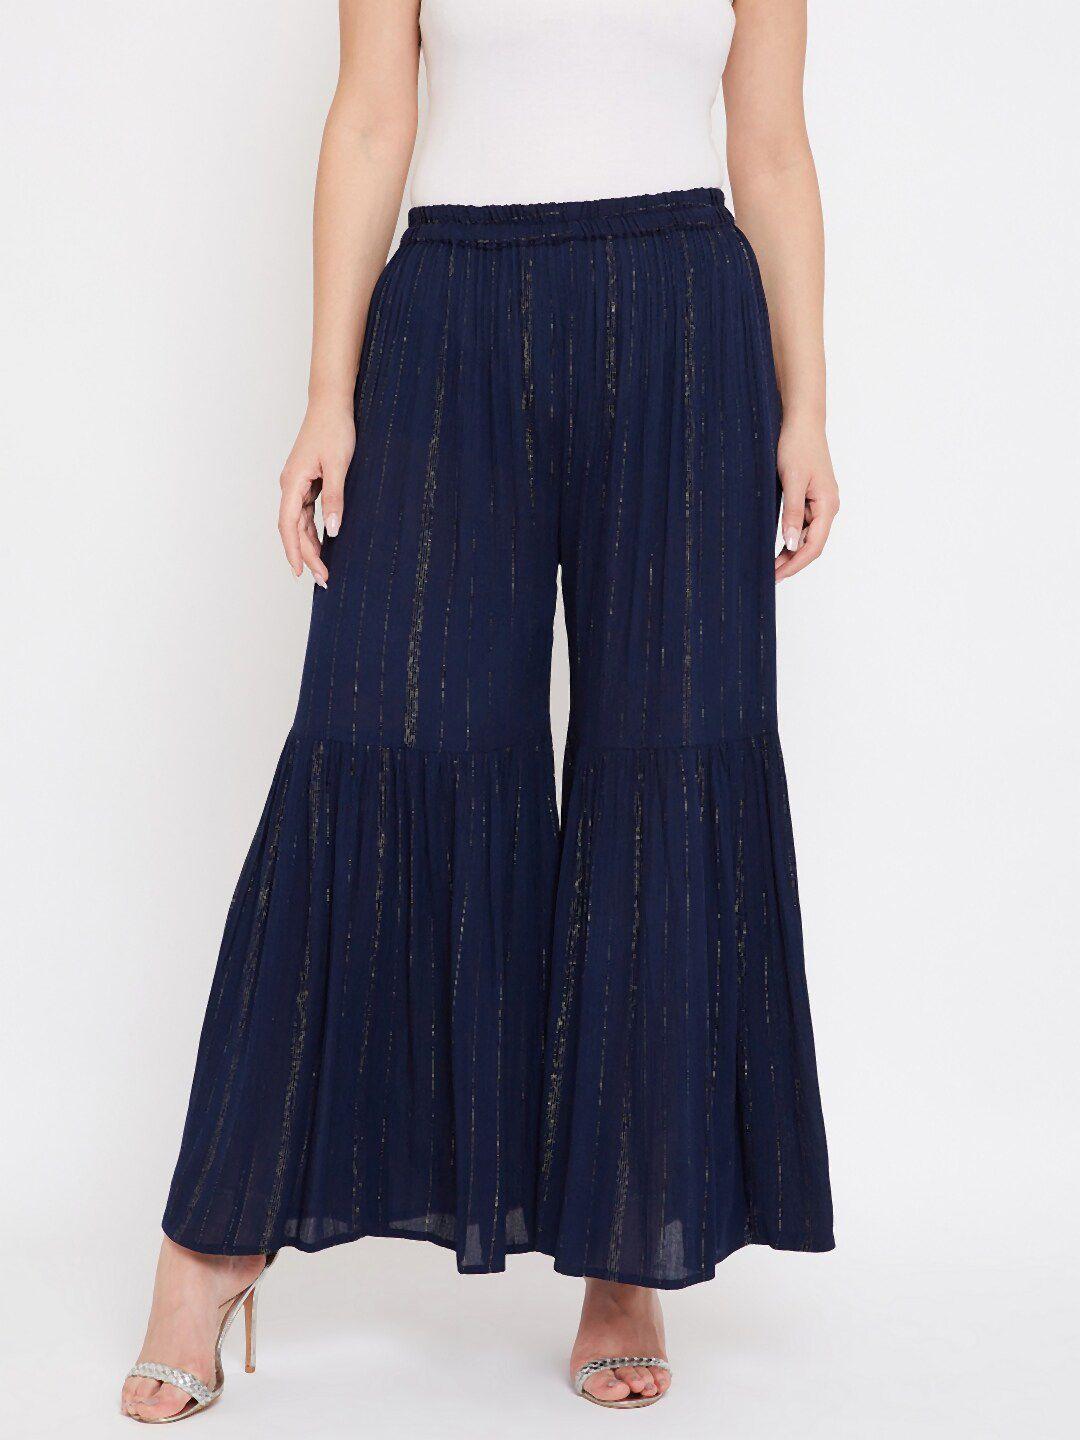 tulip-21-women-navy-blue-&-gold-toned-striped-flared-ethnic-palazzos